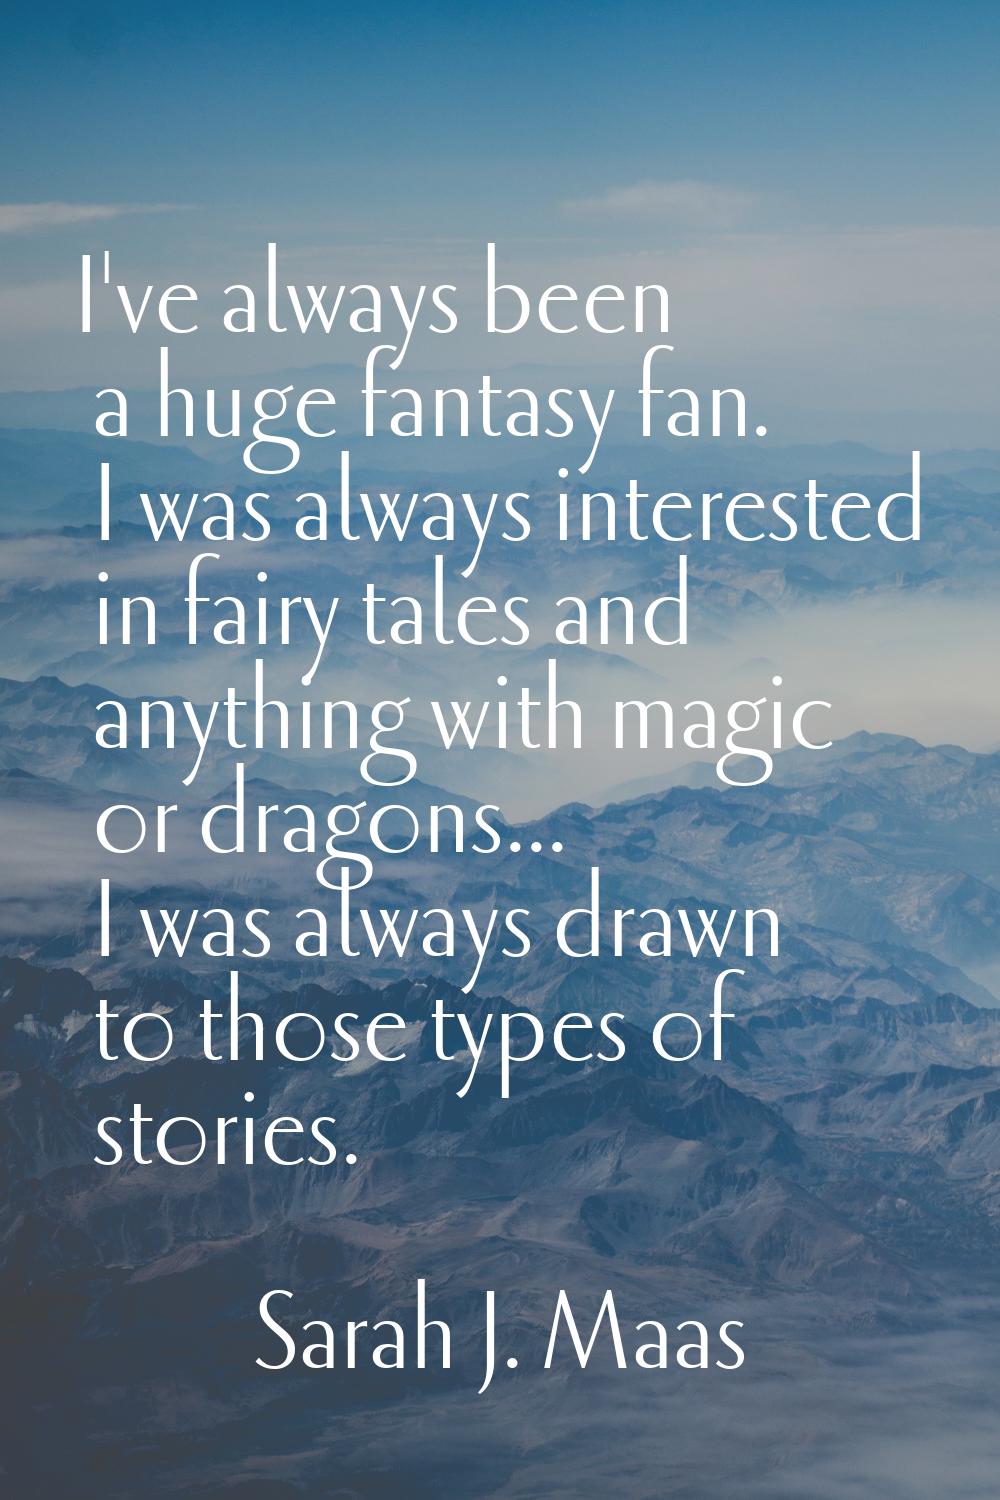 I've always been a huge fantasy fan. I was always interested in fairy tales and anything with magic